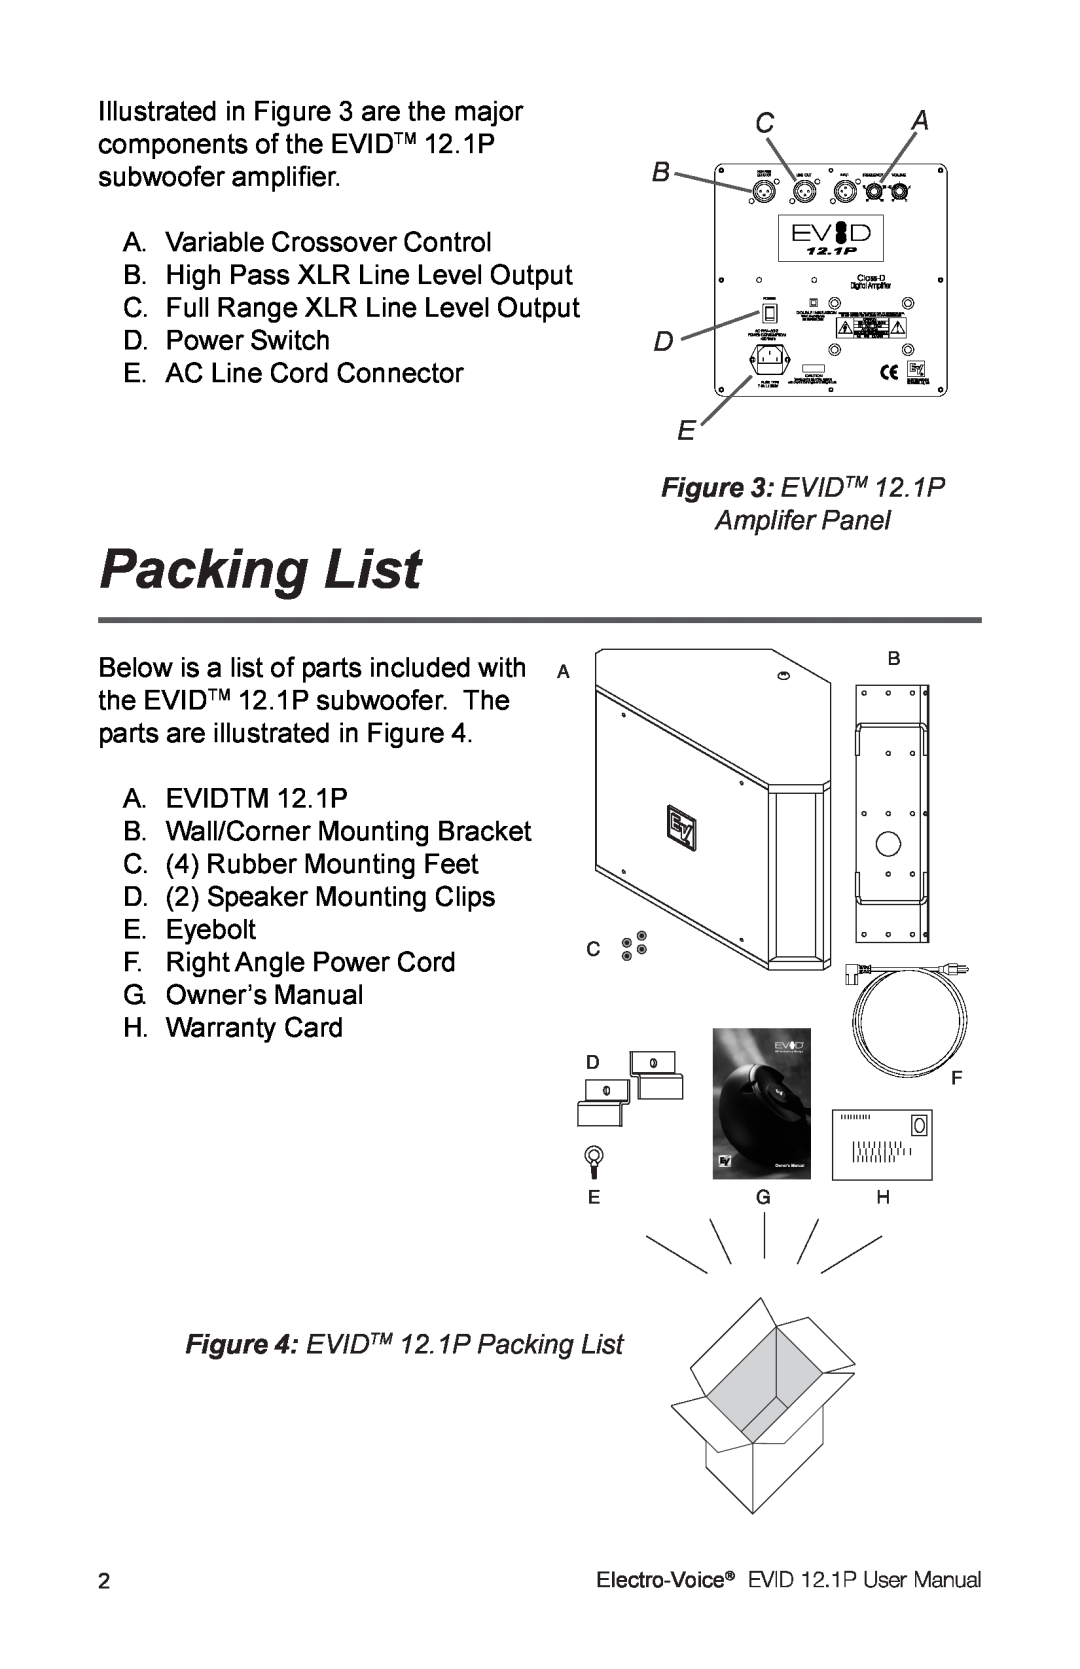 Electro-Voice user manual Packing List, EVIDTM 12.1P 